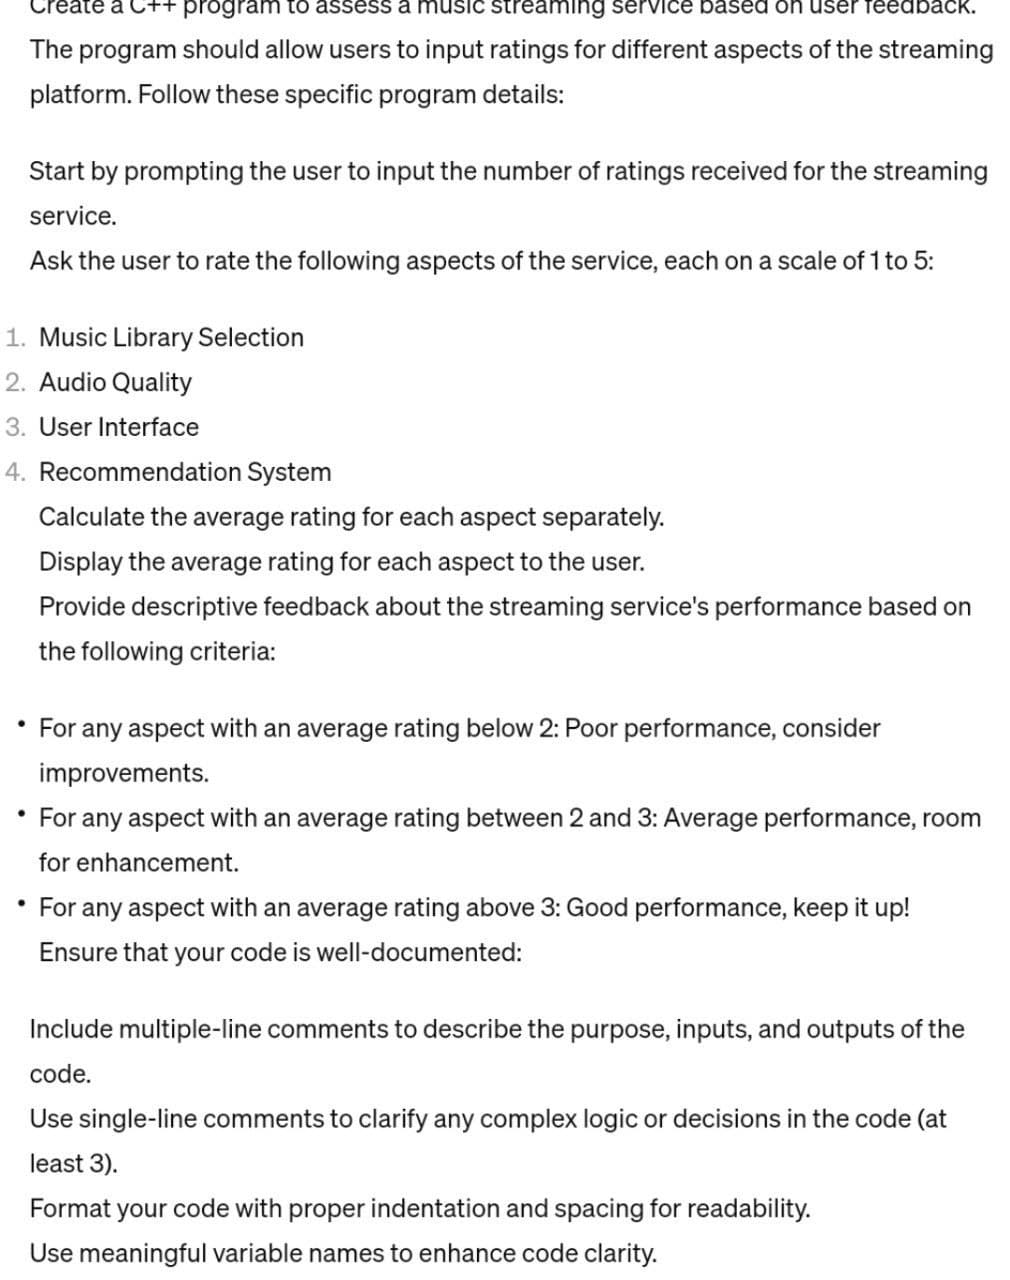 Create a C++ program to assess a music streaming service based on user feedback.
The program should allow users to input ratings for different aspects of the streaming
platform. Follow these specific program details:
Start by prompting the user to input the number of ratings received for the streaming
service.
Ask the user to rate the following aspects of the service, each on a scale of 1 to 5:
1. Music Library Selection
2. Audio Quality
3. User Interface
4. Recommendation System
Calculate the average rating for each aspect separately.
Display the average rating for each aspect to the user.
Provide descriptive feedback about the streaming service's performance based on
the following criteria:
For any aspect with an average rating below 2: Poor performance, consider
improvements.
• For any aspect with an average rating between 2 and 3: Average performance, room
for enhancement.
For any aspect with an average rating above 3: Good performance, keep it up!
Ensure that your code is well-documented:
Include multiple-line comments to describe the purpose, inputs, and outputs of the
code.
Use single-line comments to clarify any complex logic or decisions in the code (at
least 3).
Format your code with proper indentation and spacing for readability.
Use meaningful variable names to enhance code clarity.